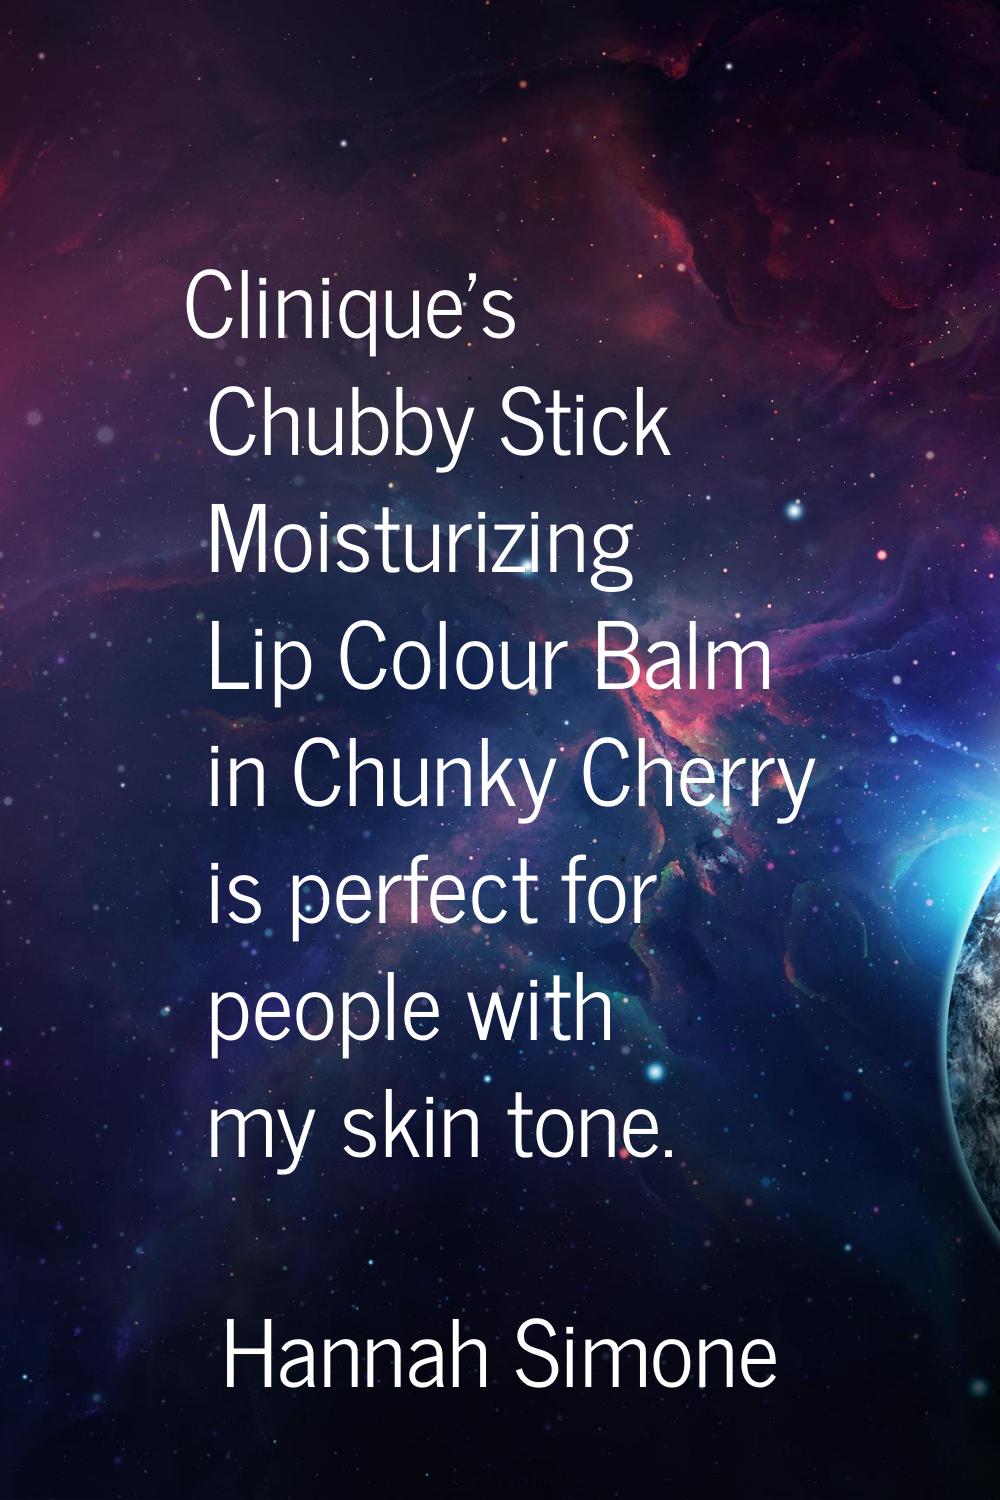 Clinique's Chubby Stick Moisturizing Lip Colour Balm in Chunky Cherry is perfect for people with my